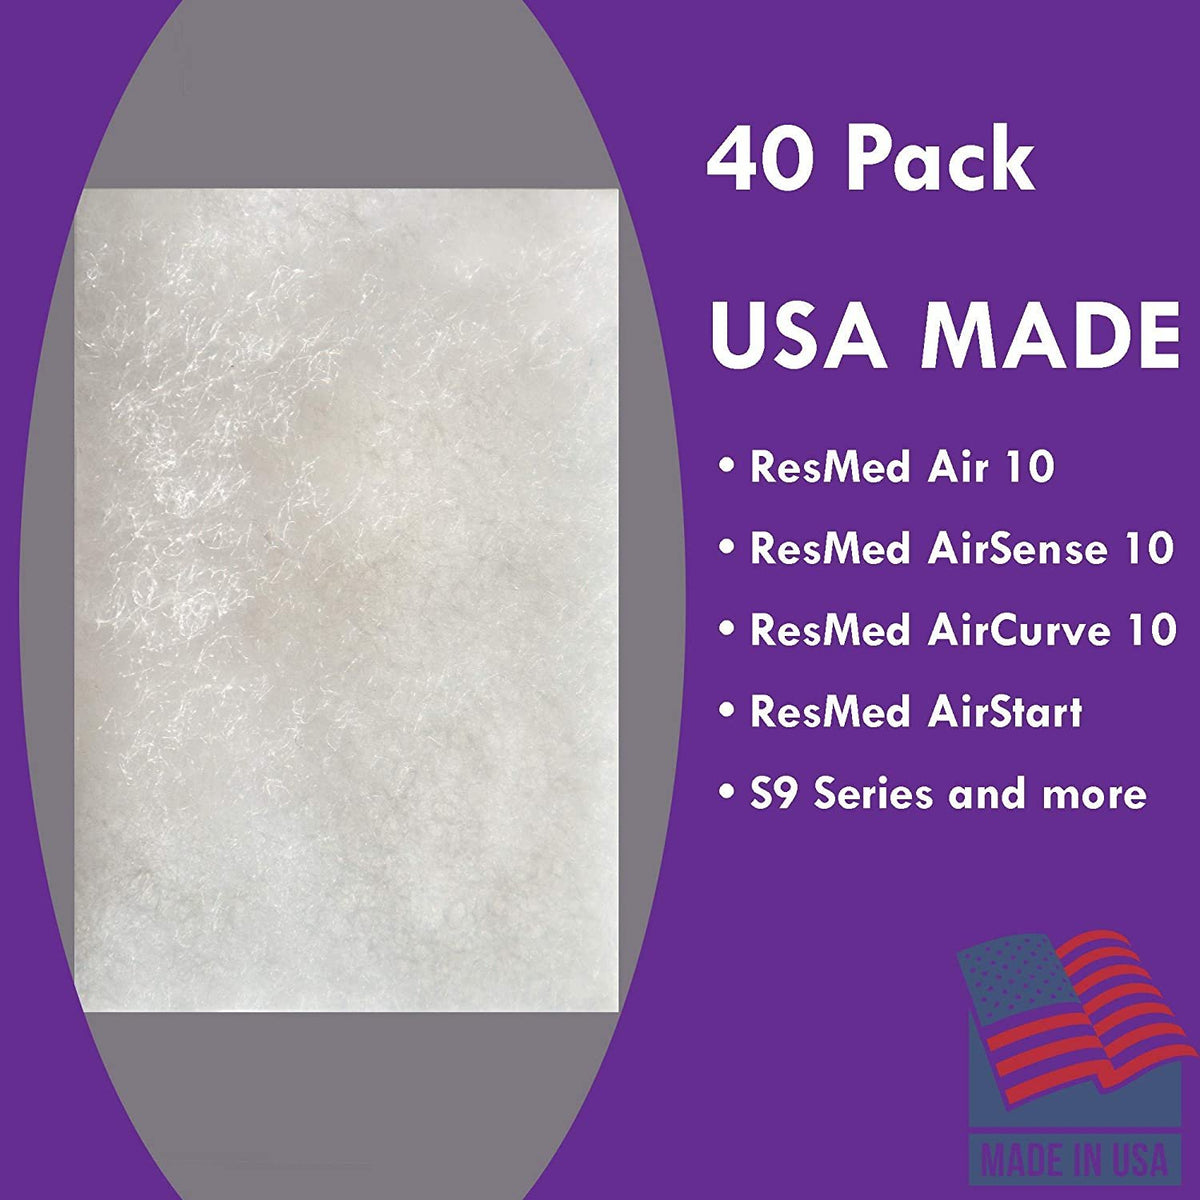 CPAP Filters Disposable Felt Pollen air Filter - Pack Standard Universal CPAP Filter Supplies - ResMed Airsense 10, Aircurve 10, S9 Series Machines - by Mars Wellness